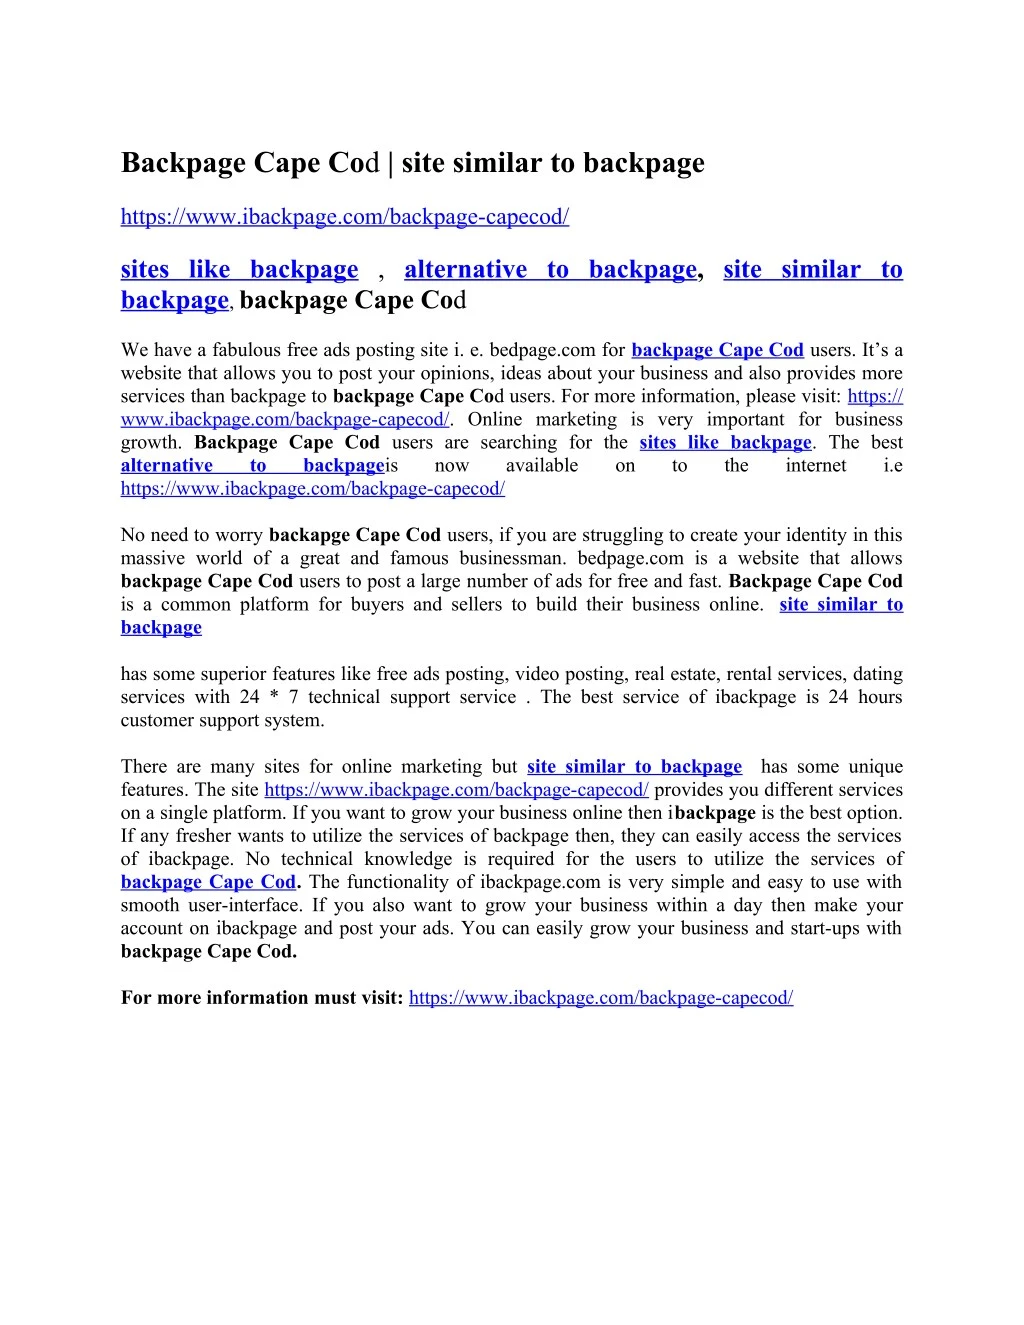 backpage cape co d site similar to backpage